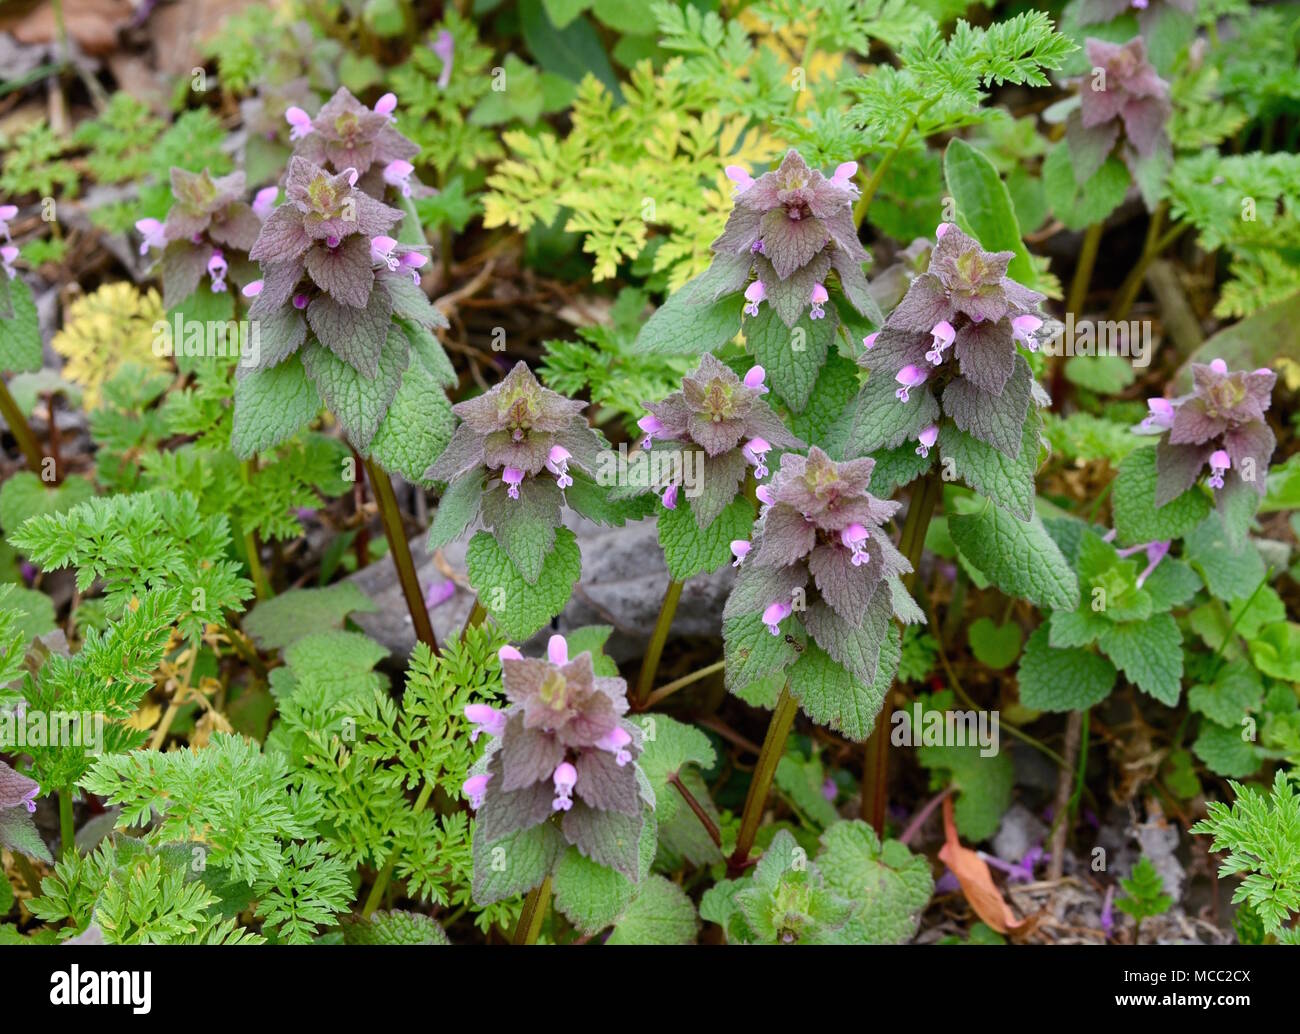 A group of red dead nettle plants with pink flowers and purple and green leaves. Stock Photo